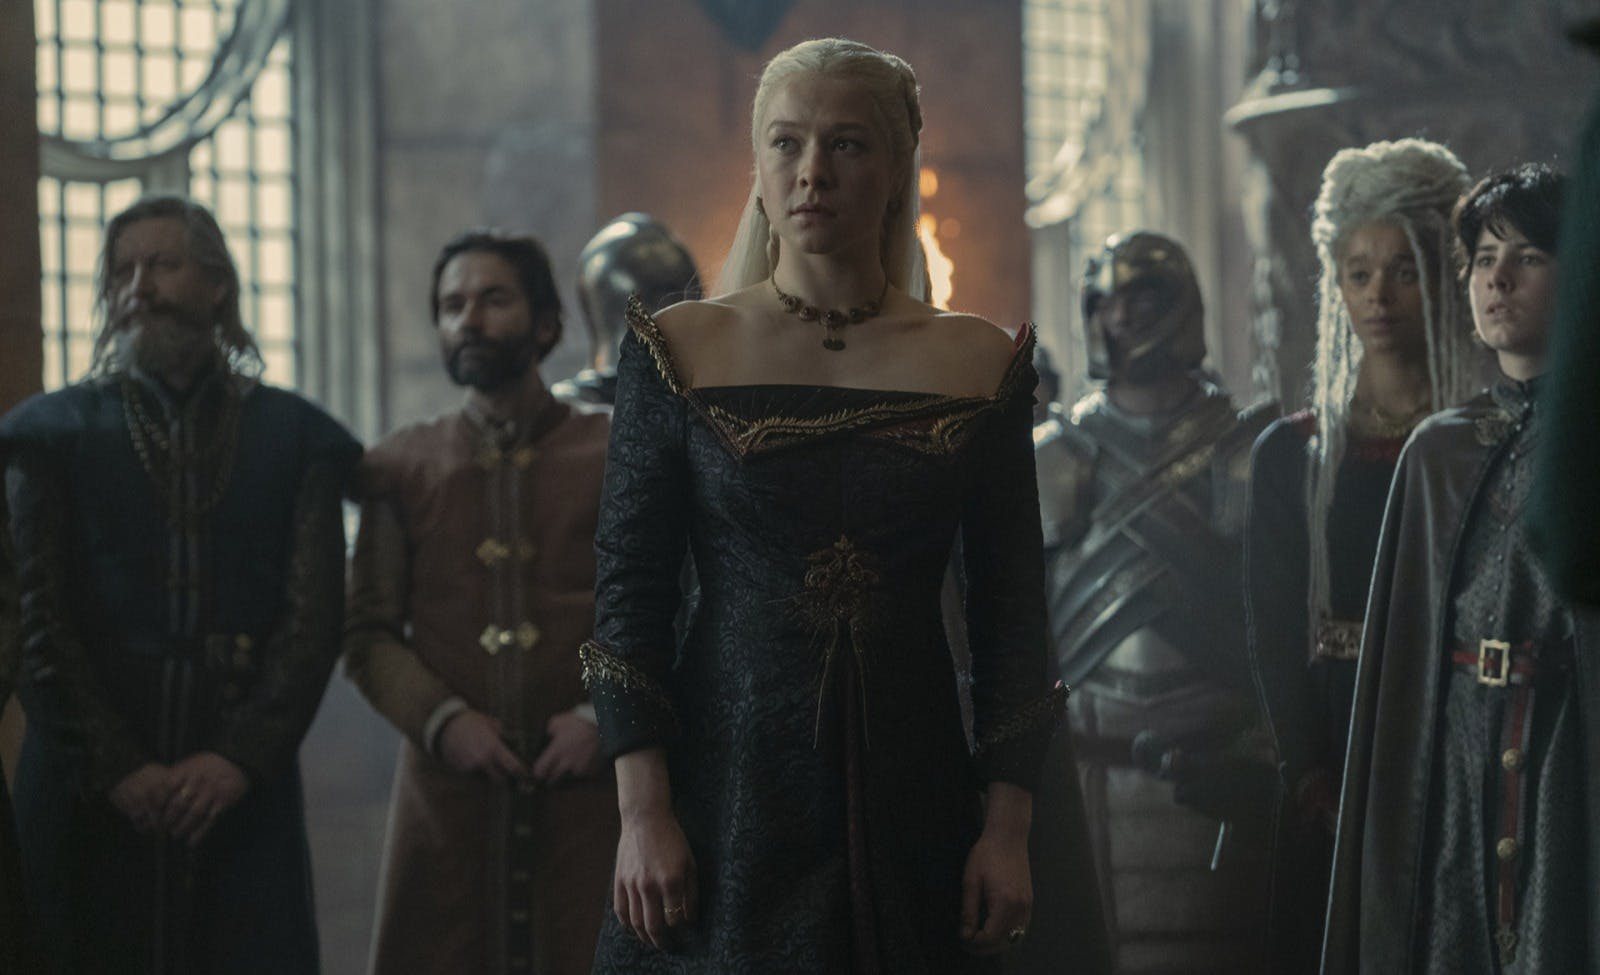 Emma D’Arcy as Rhaenyra Targaryen in 'House of the Dragon' Episode 8, "Lord of the Tides" (HBO)